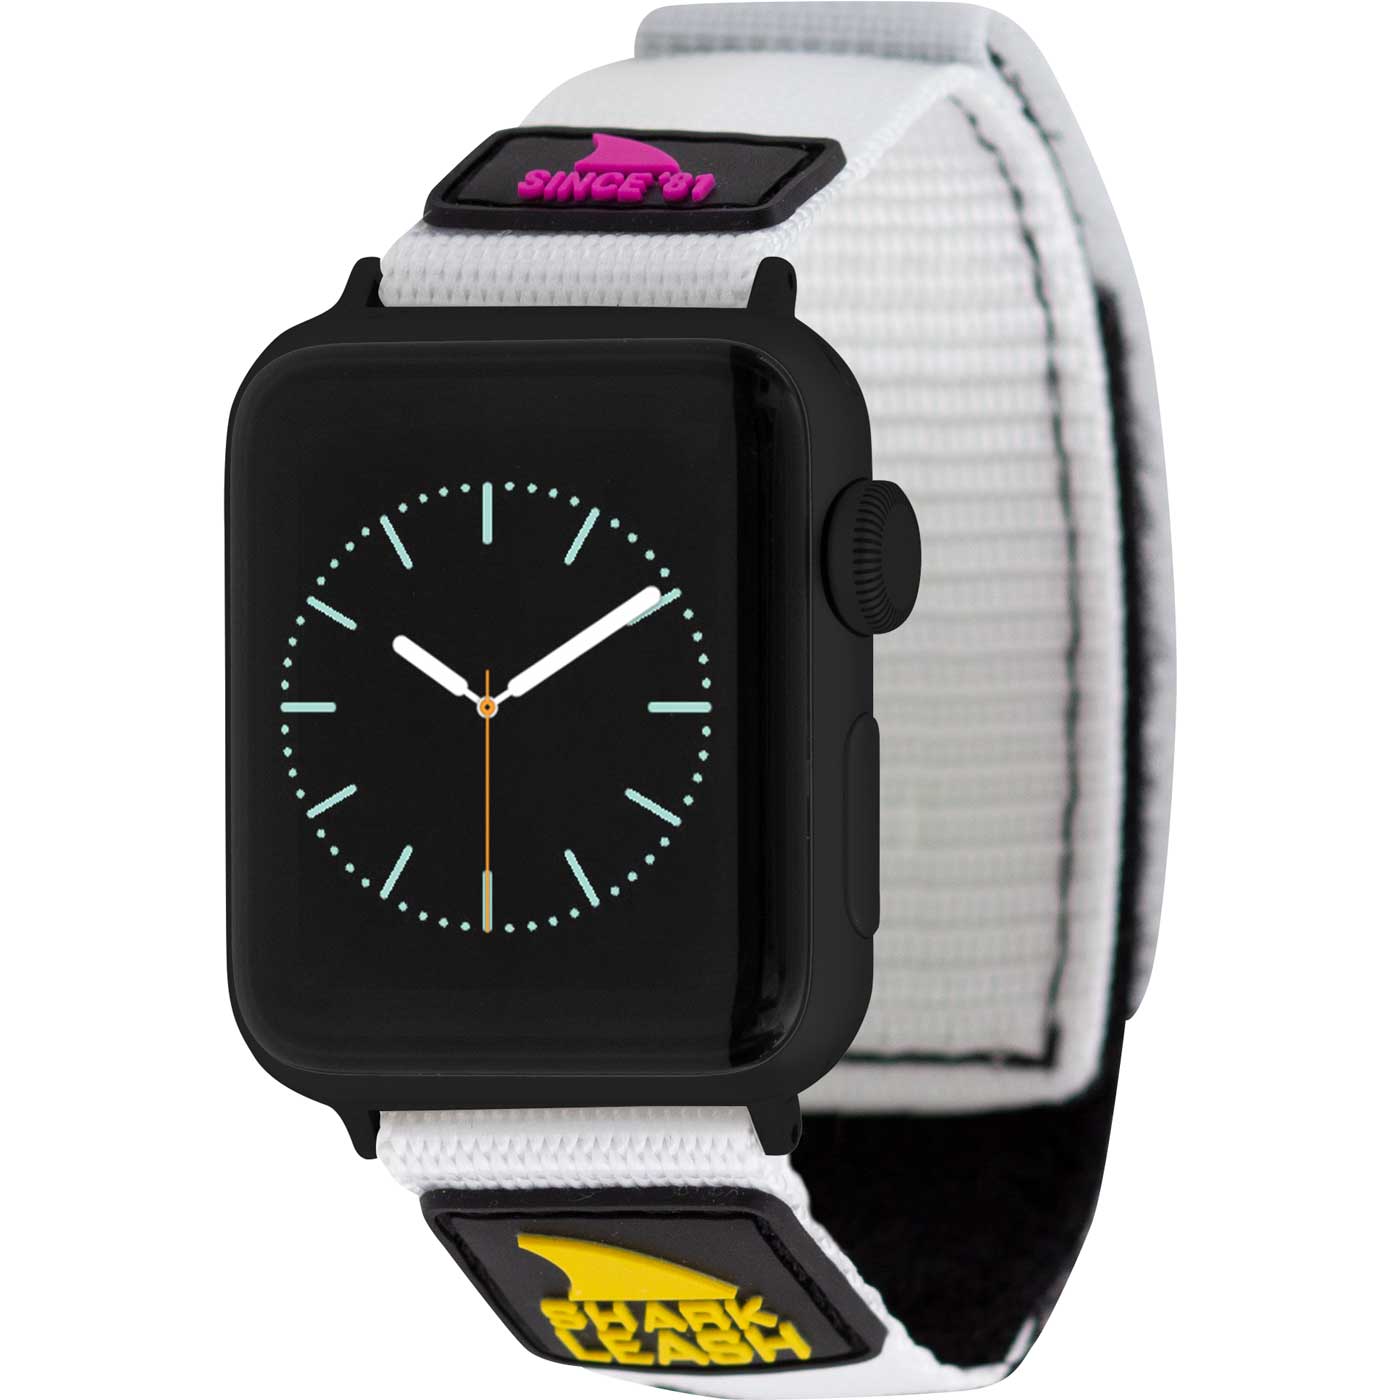 Freestyle Shark Apple Watch Band Review - bmp-tools